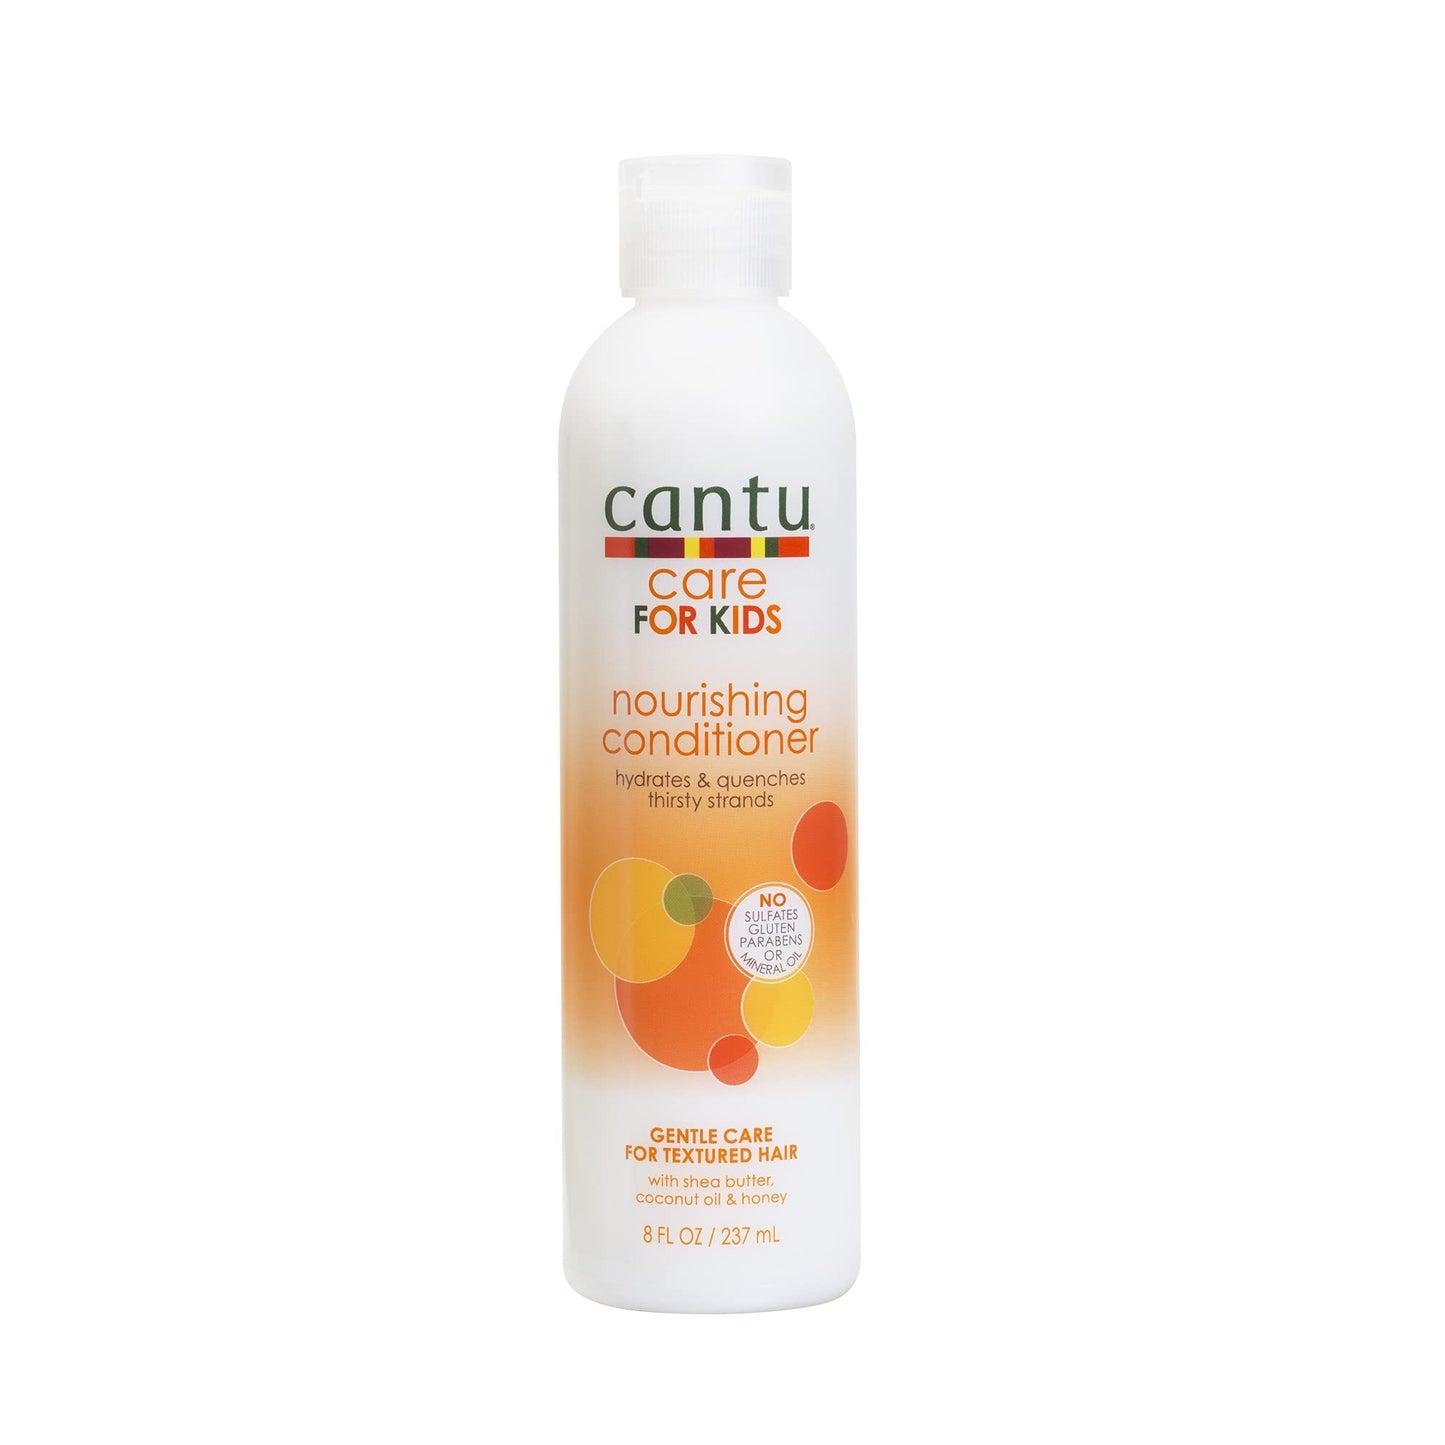 Cantu care for kids conditioner